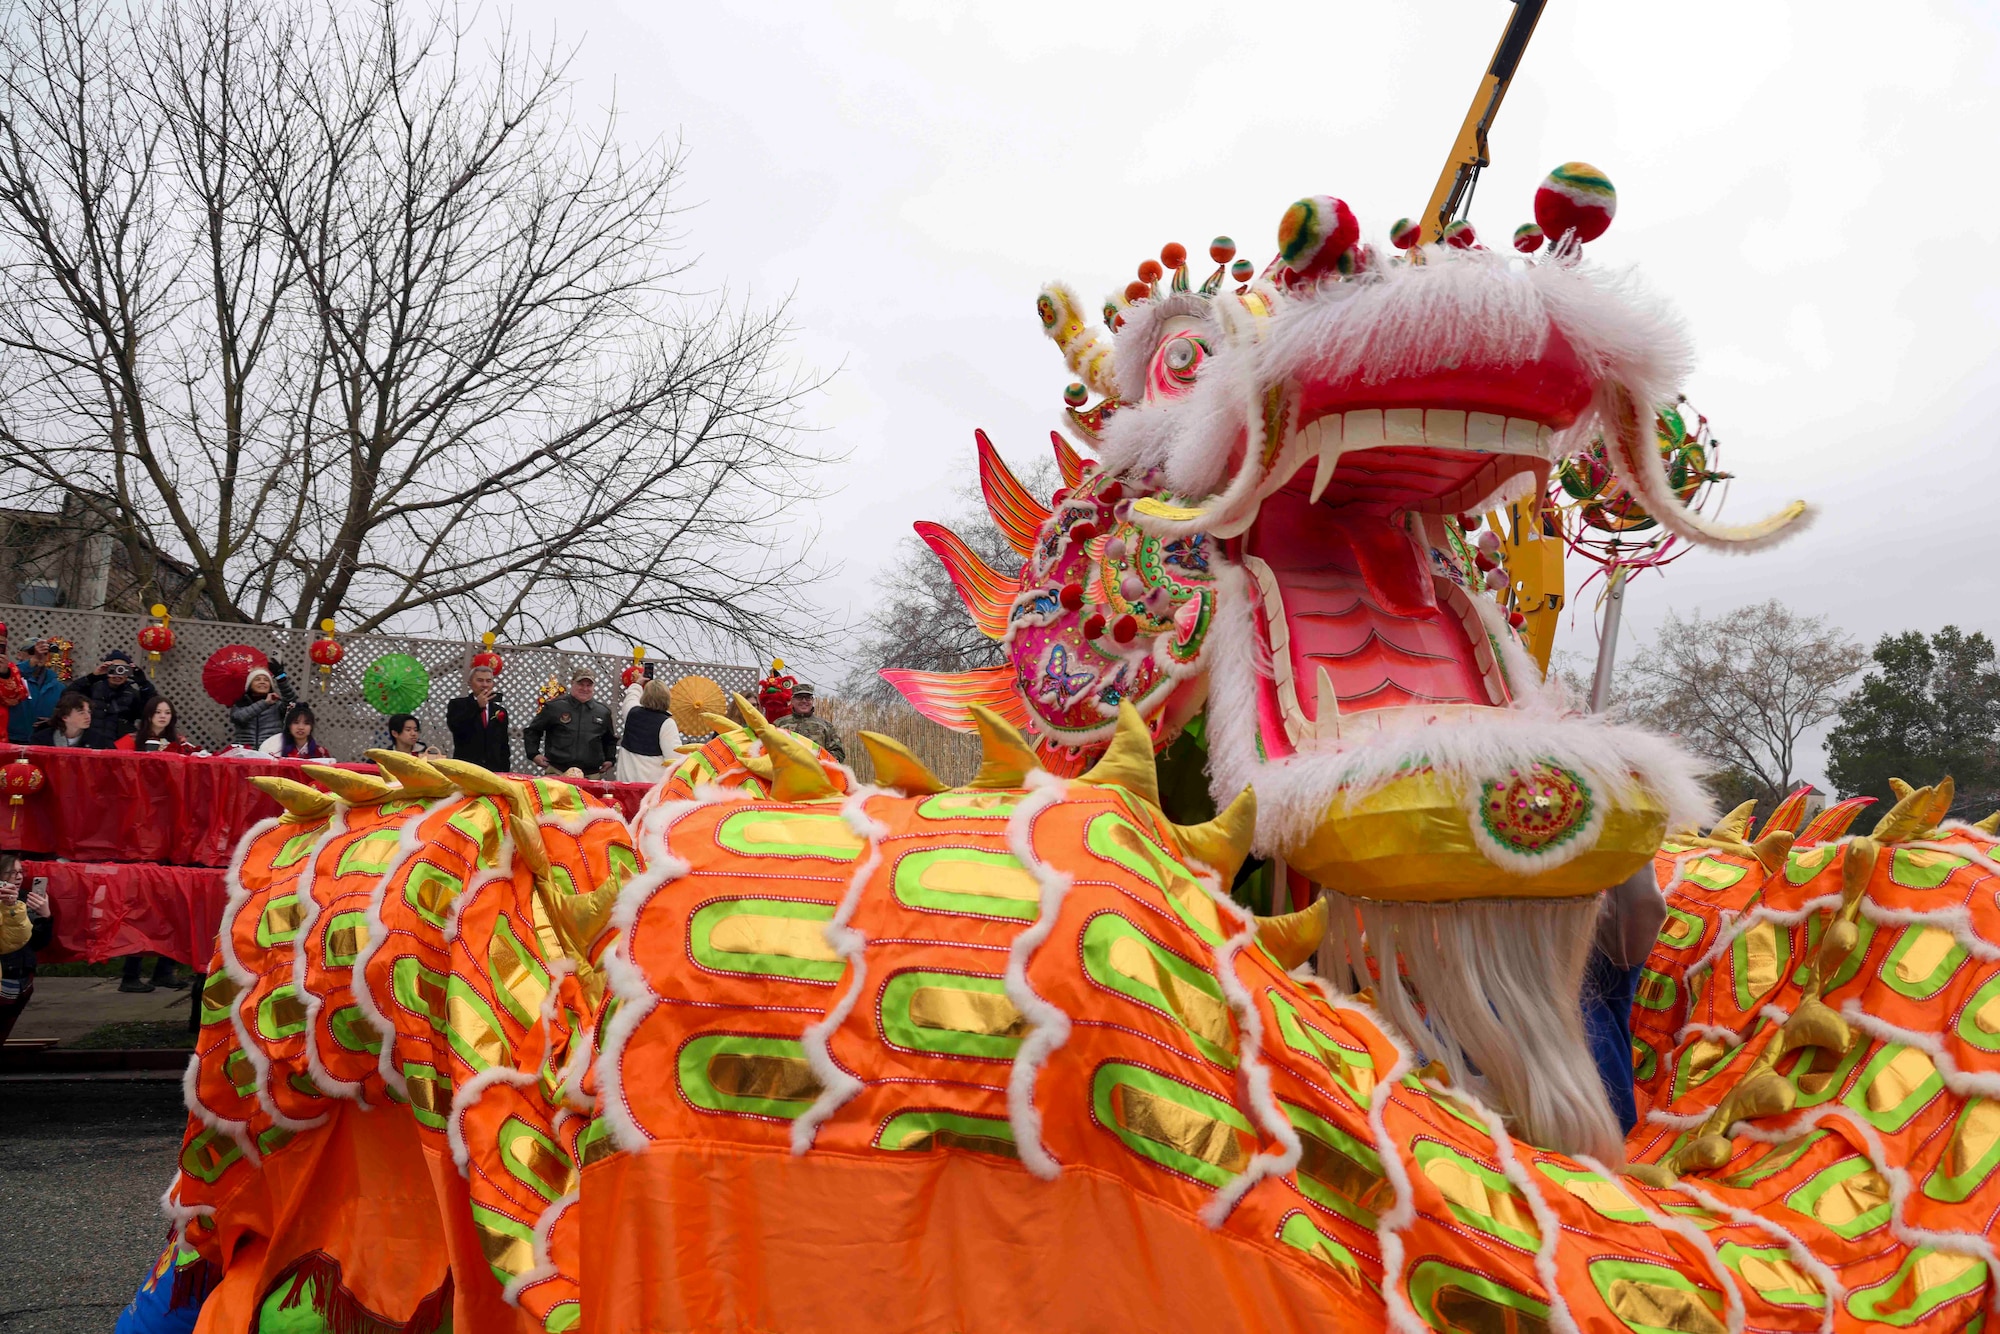 Airmen from Beale Air Force Base, Calif., lifted the dragon “Hong Wan Lung” in front of special guests during the 143rd Bok Kai parade on Feb. 25, 2023, in Marysville, Calif.